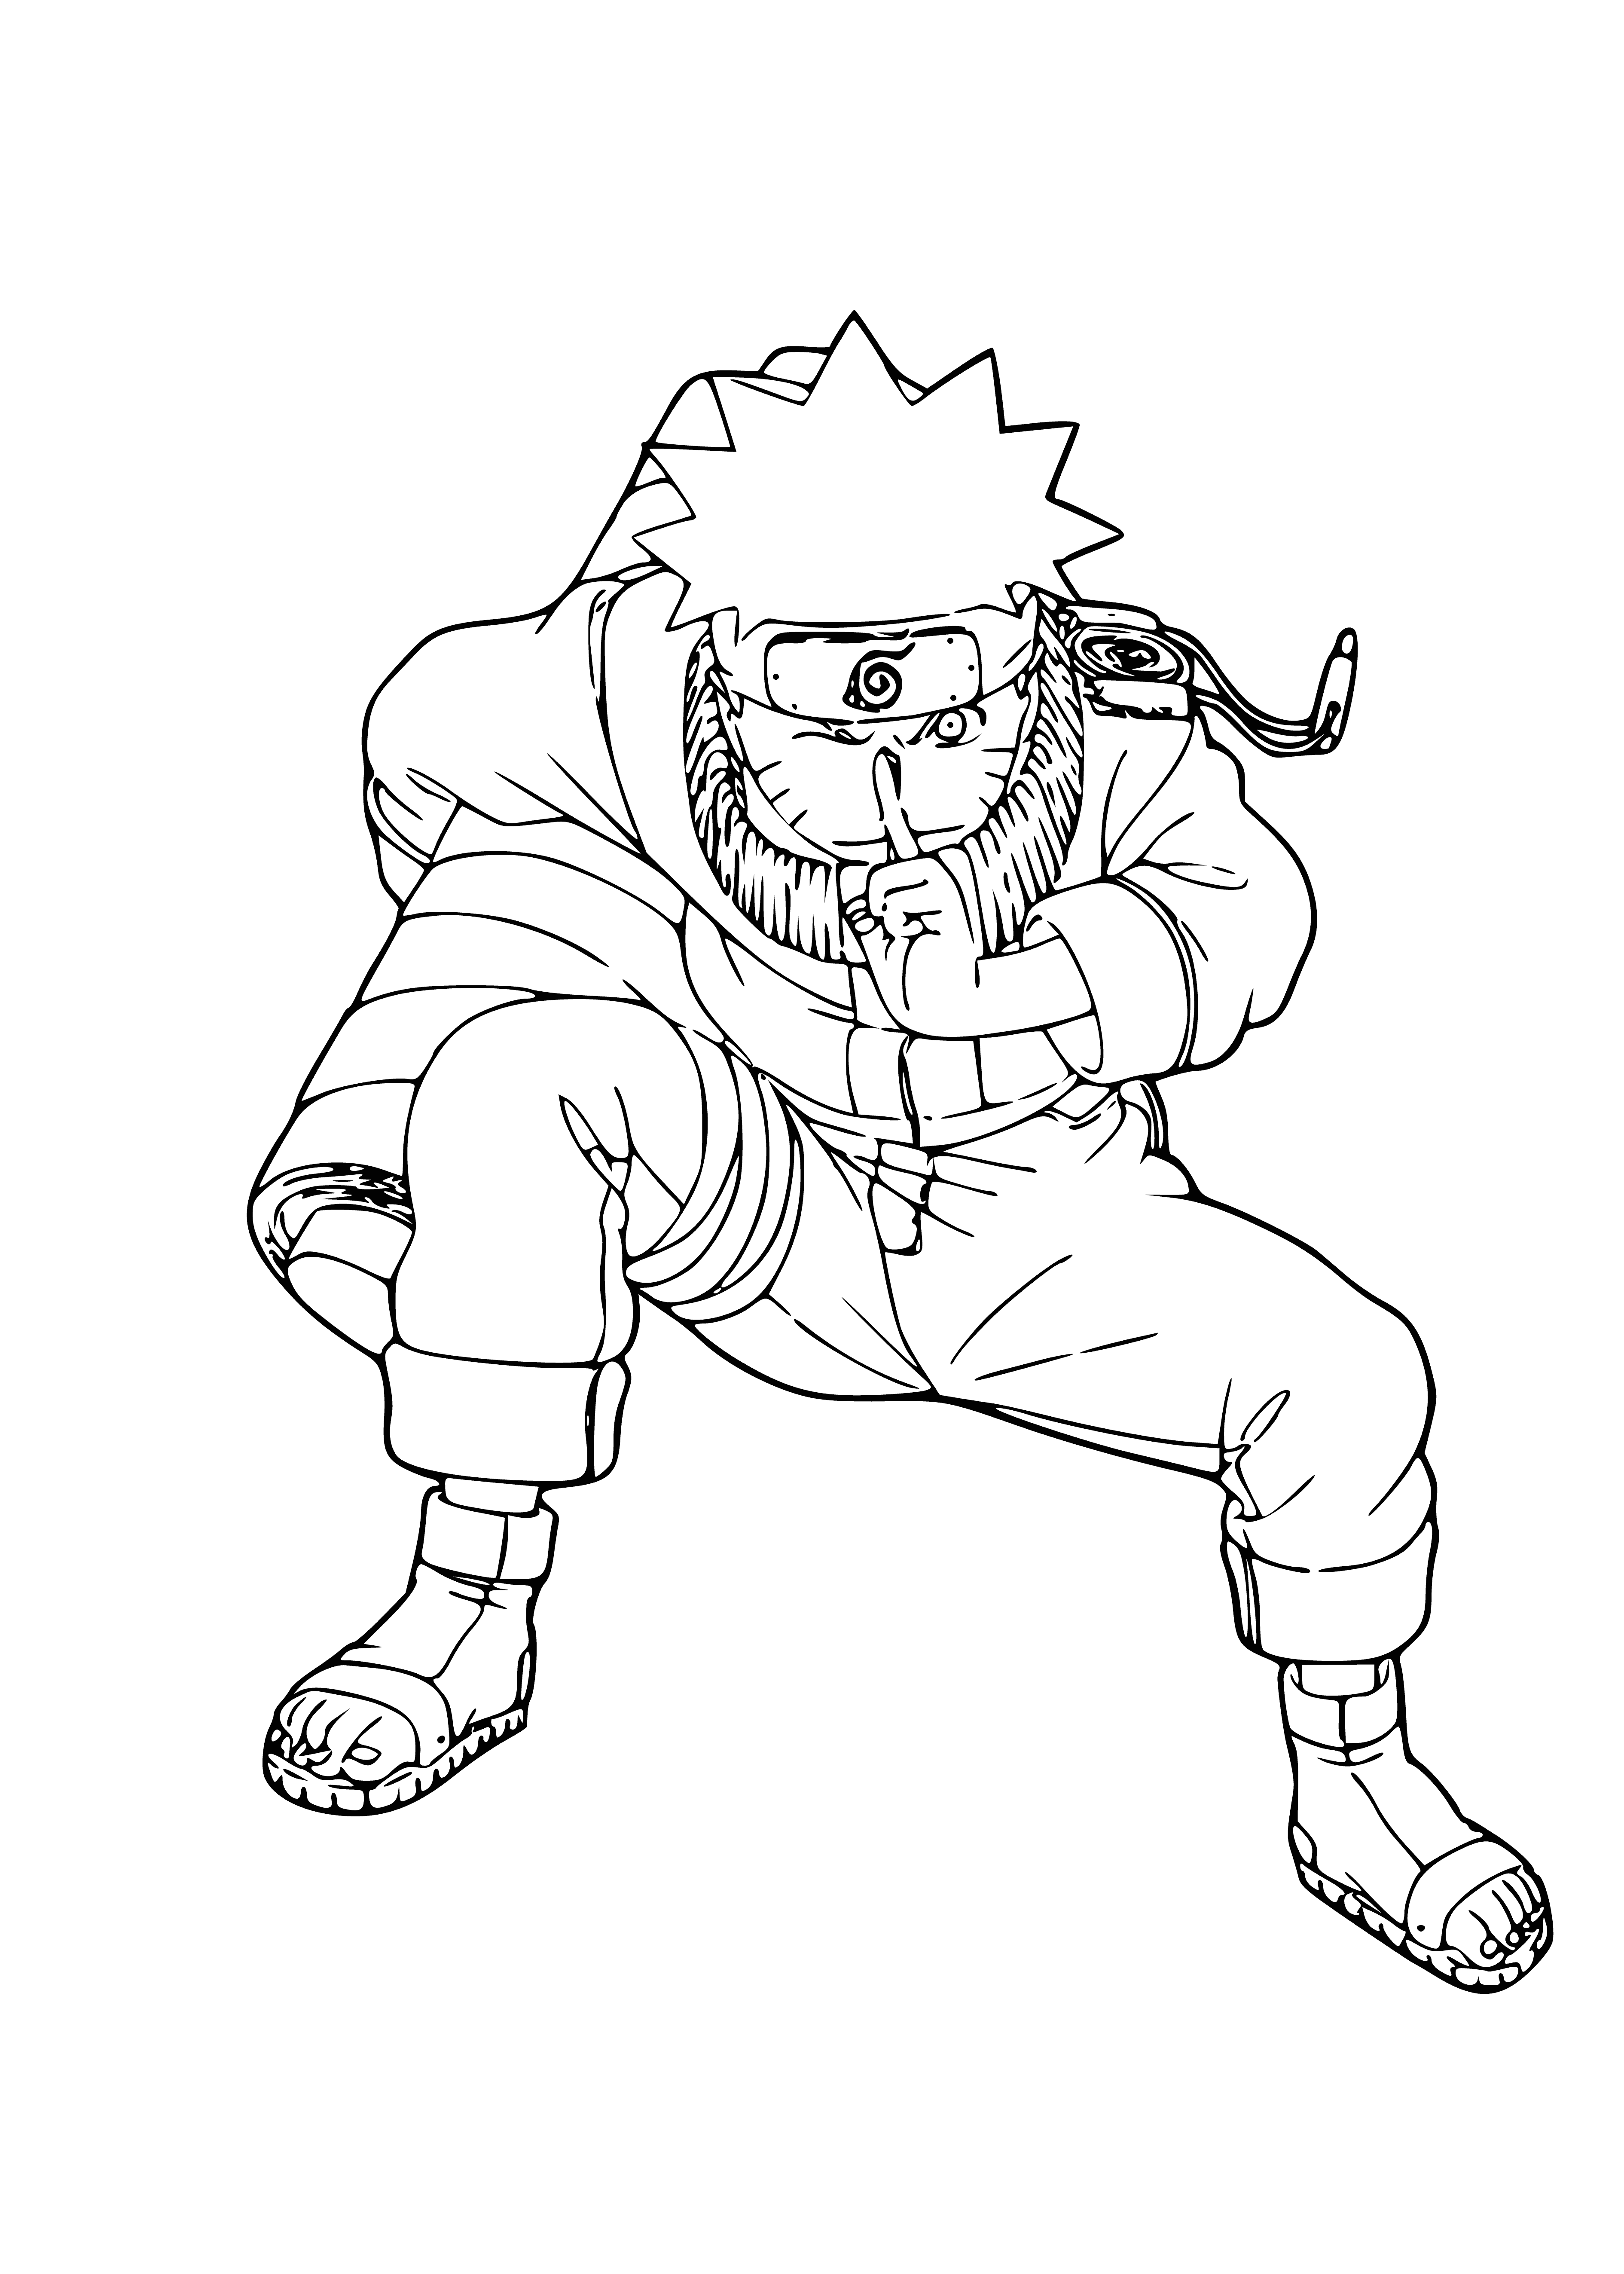 coloring page: Naruto's powerful Rasengan technique is in the center of the page, flanked by two smaller chakra spirals & a blue sky, white clouds backdrop.